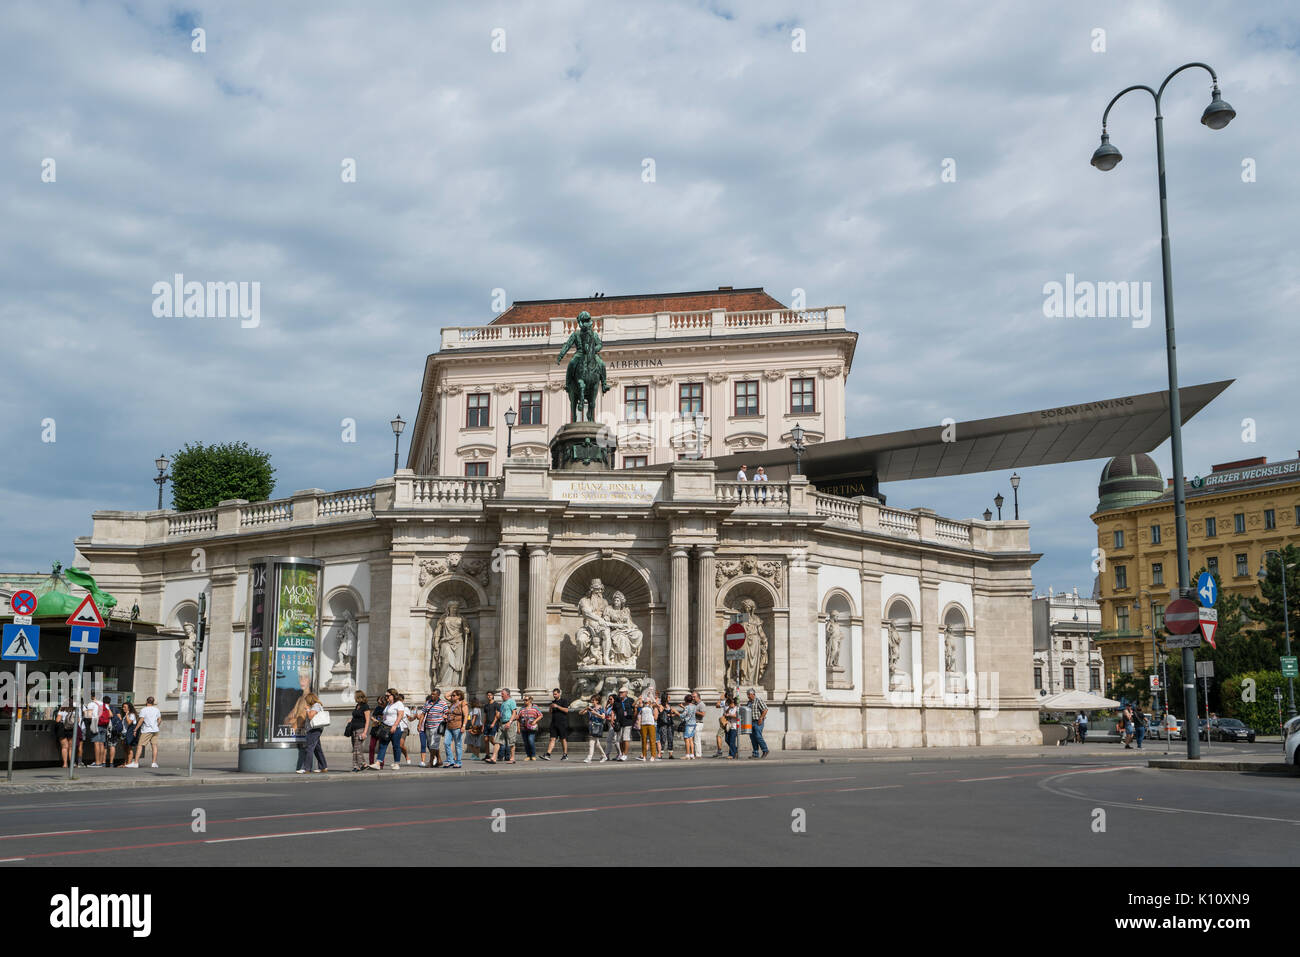 The building of Albertina Museum in the center of Vienna Stock Photo